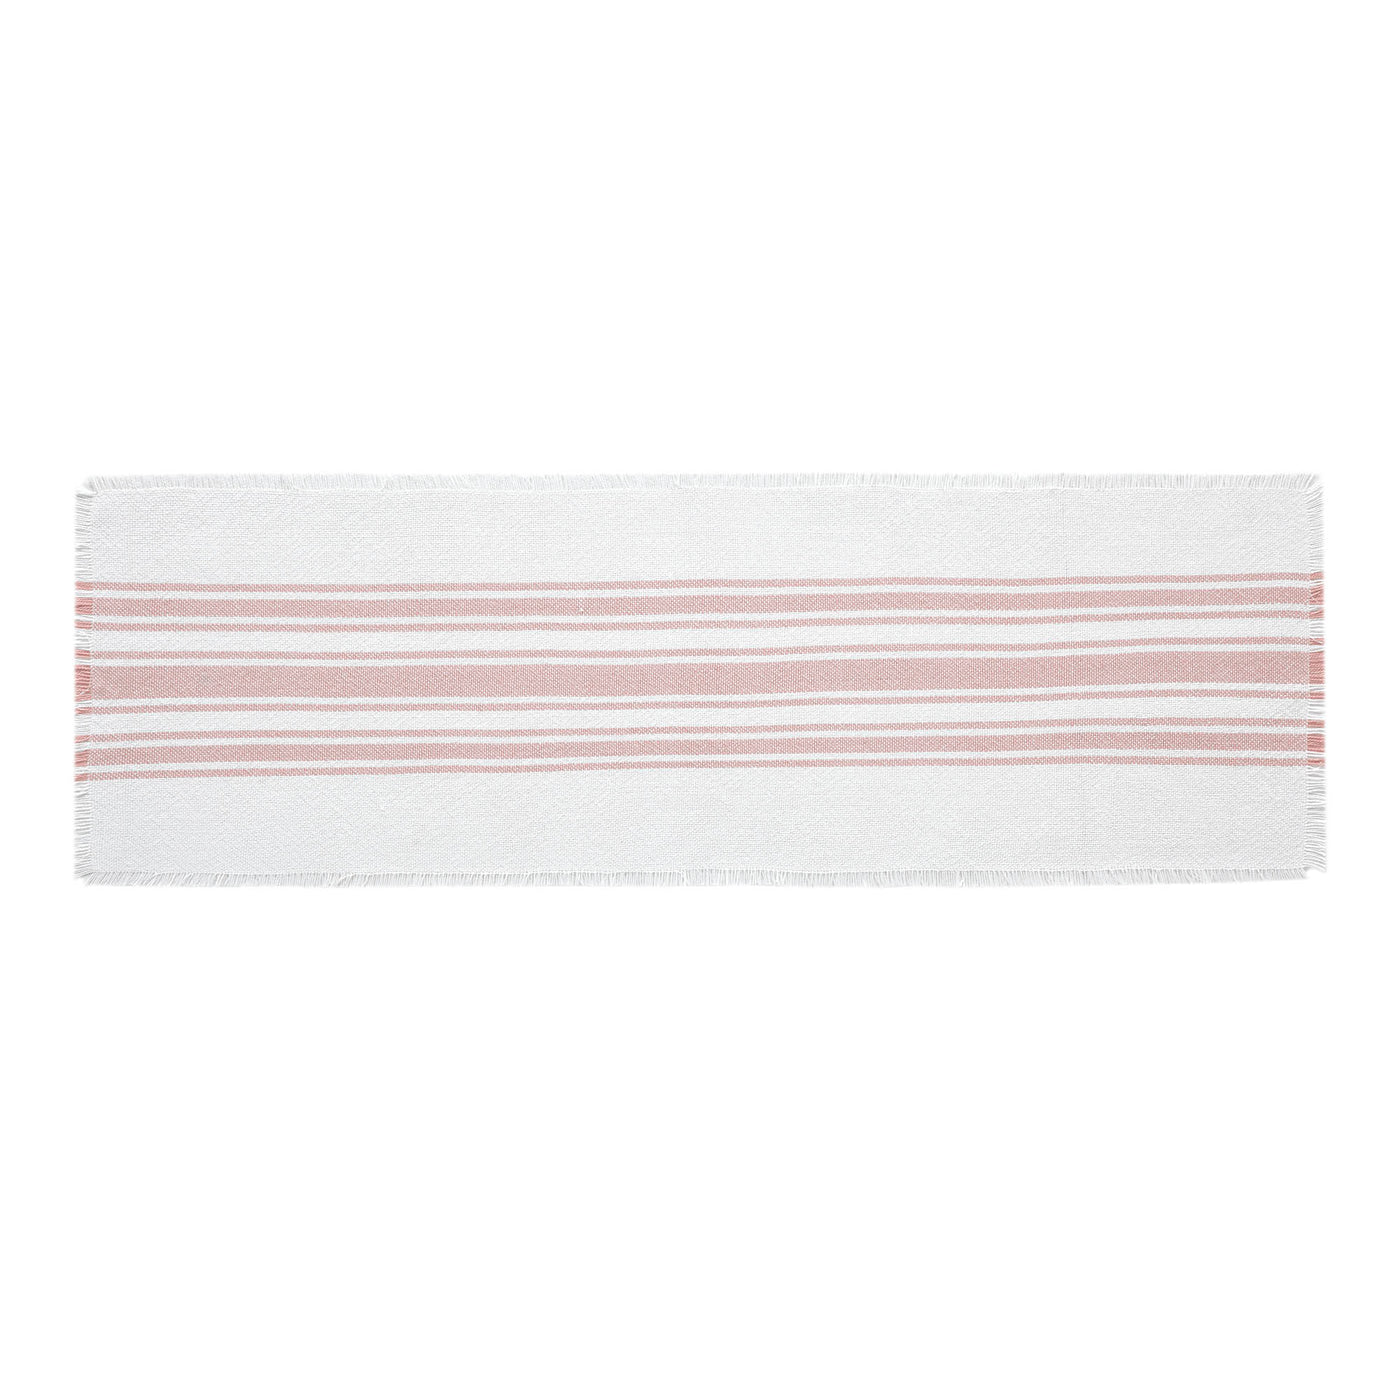 Antique White Stripe Coral Indoor/Outdoor Table Runner 12" x 36"